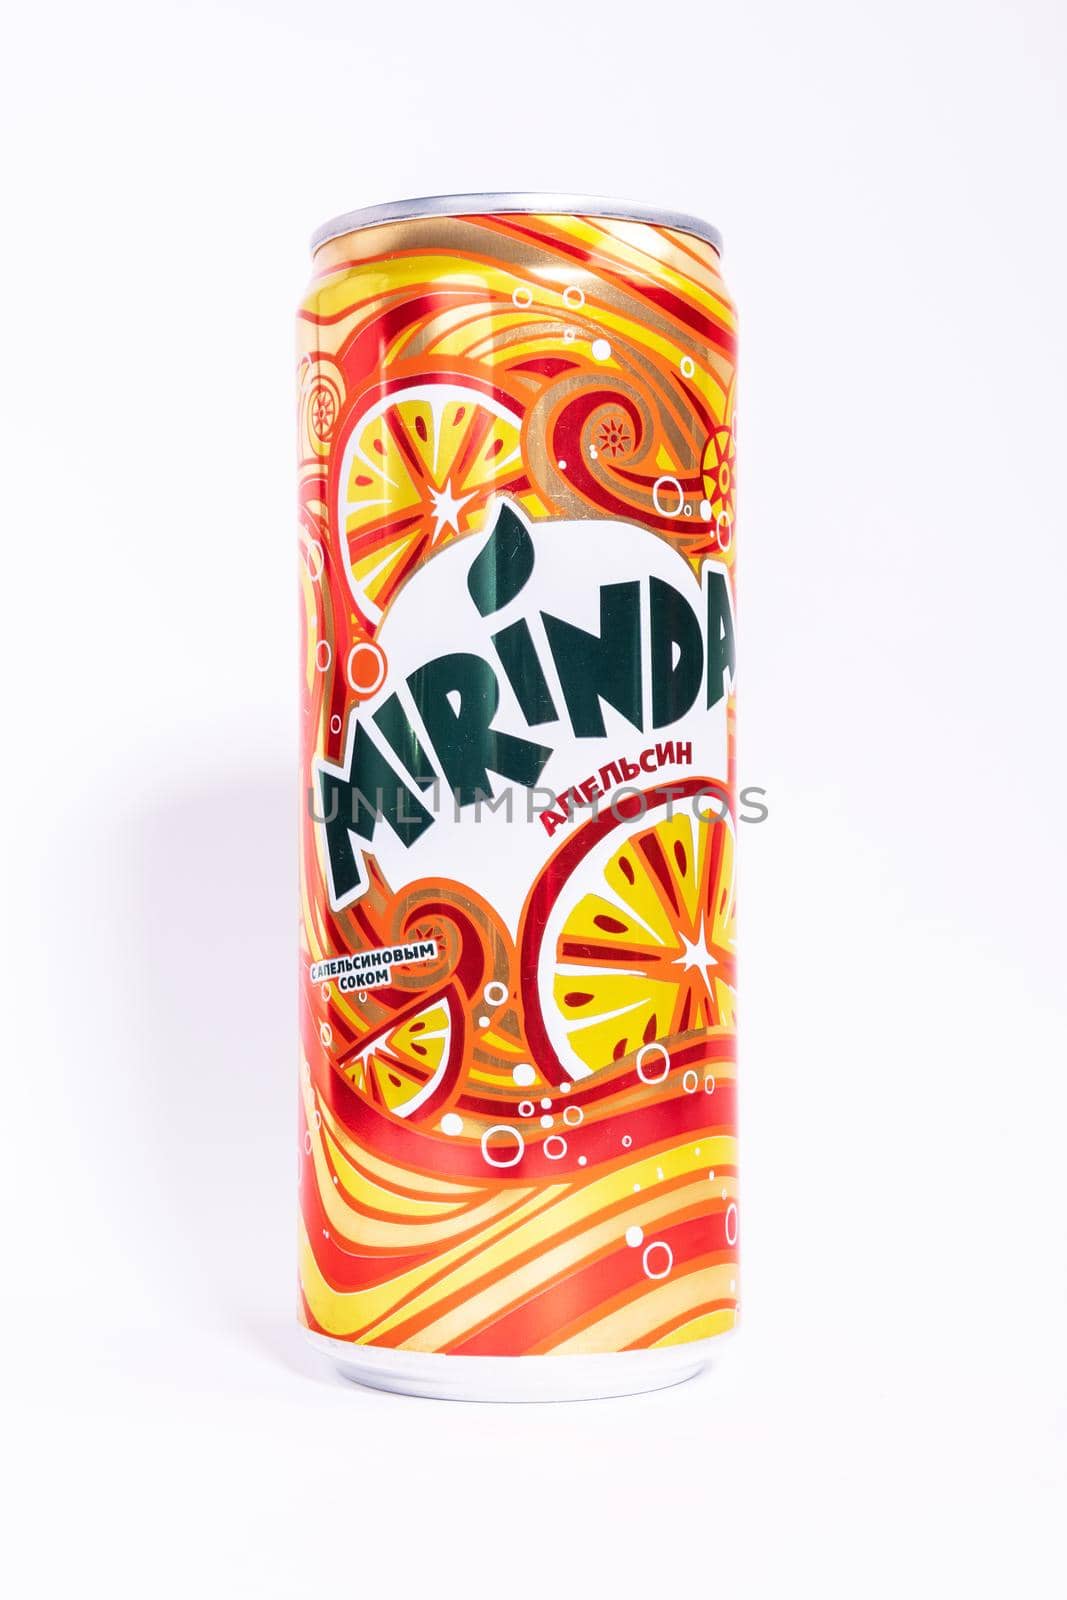 Tyumen, Russia-May 25, 2021: Mirinda can isolated on a white background. Mirinda produced by PepsiCo Inc.